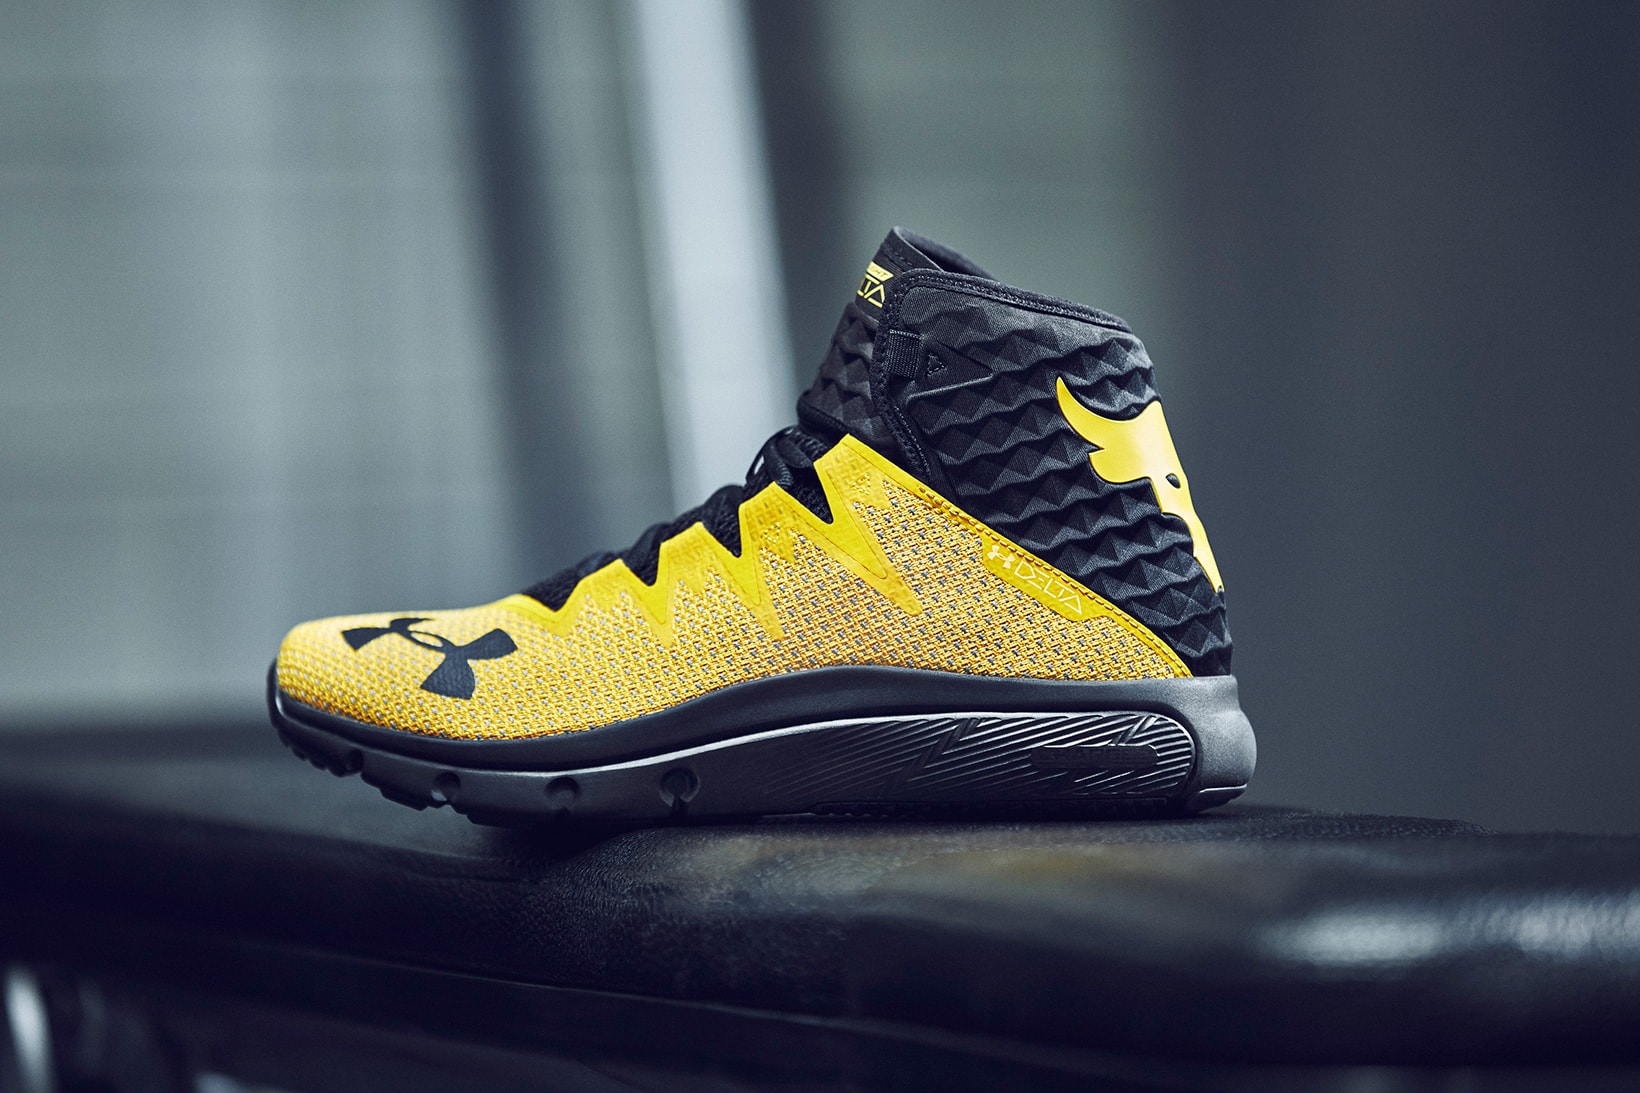 Under Armour just dropped new Project Rock 3 Training shoe; Here's